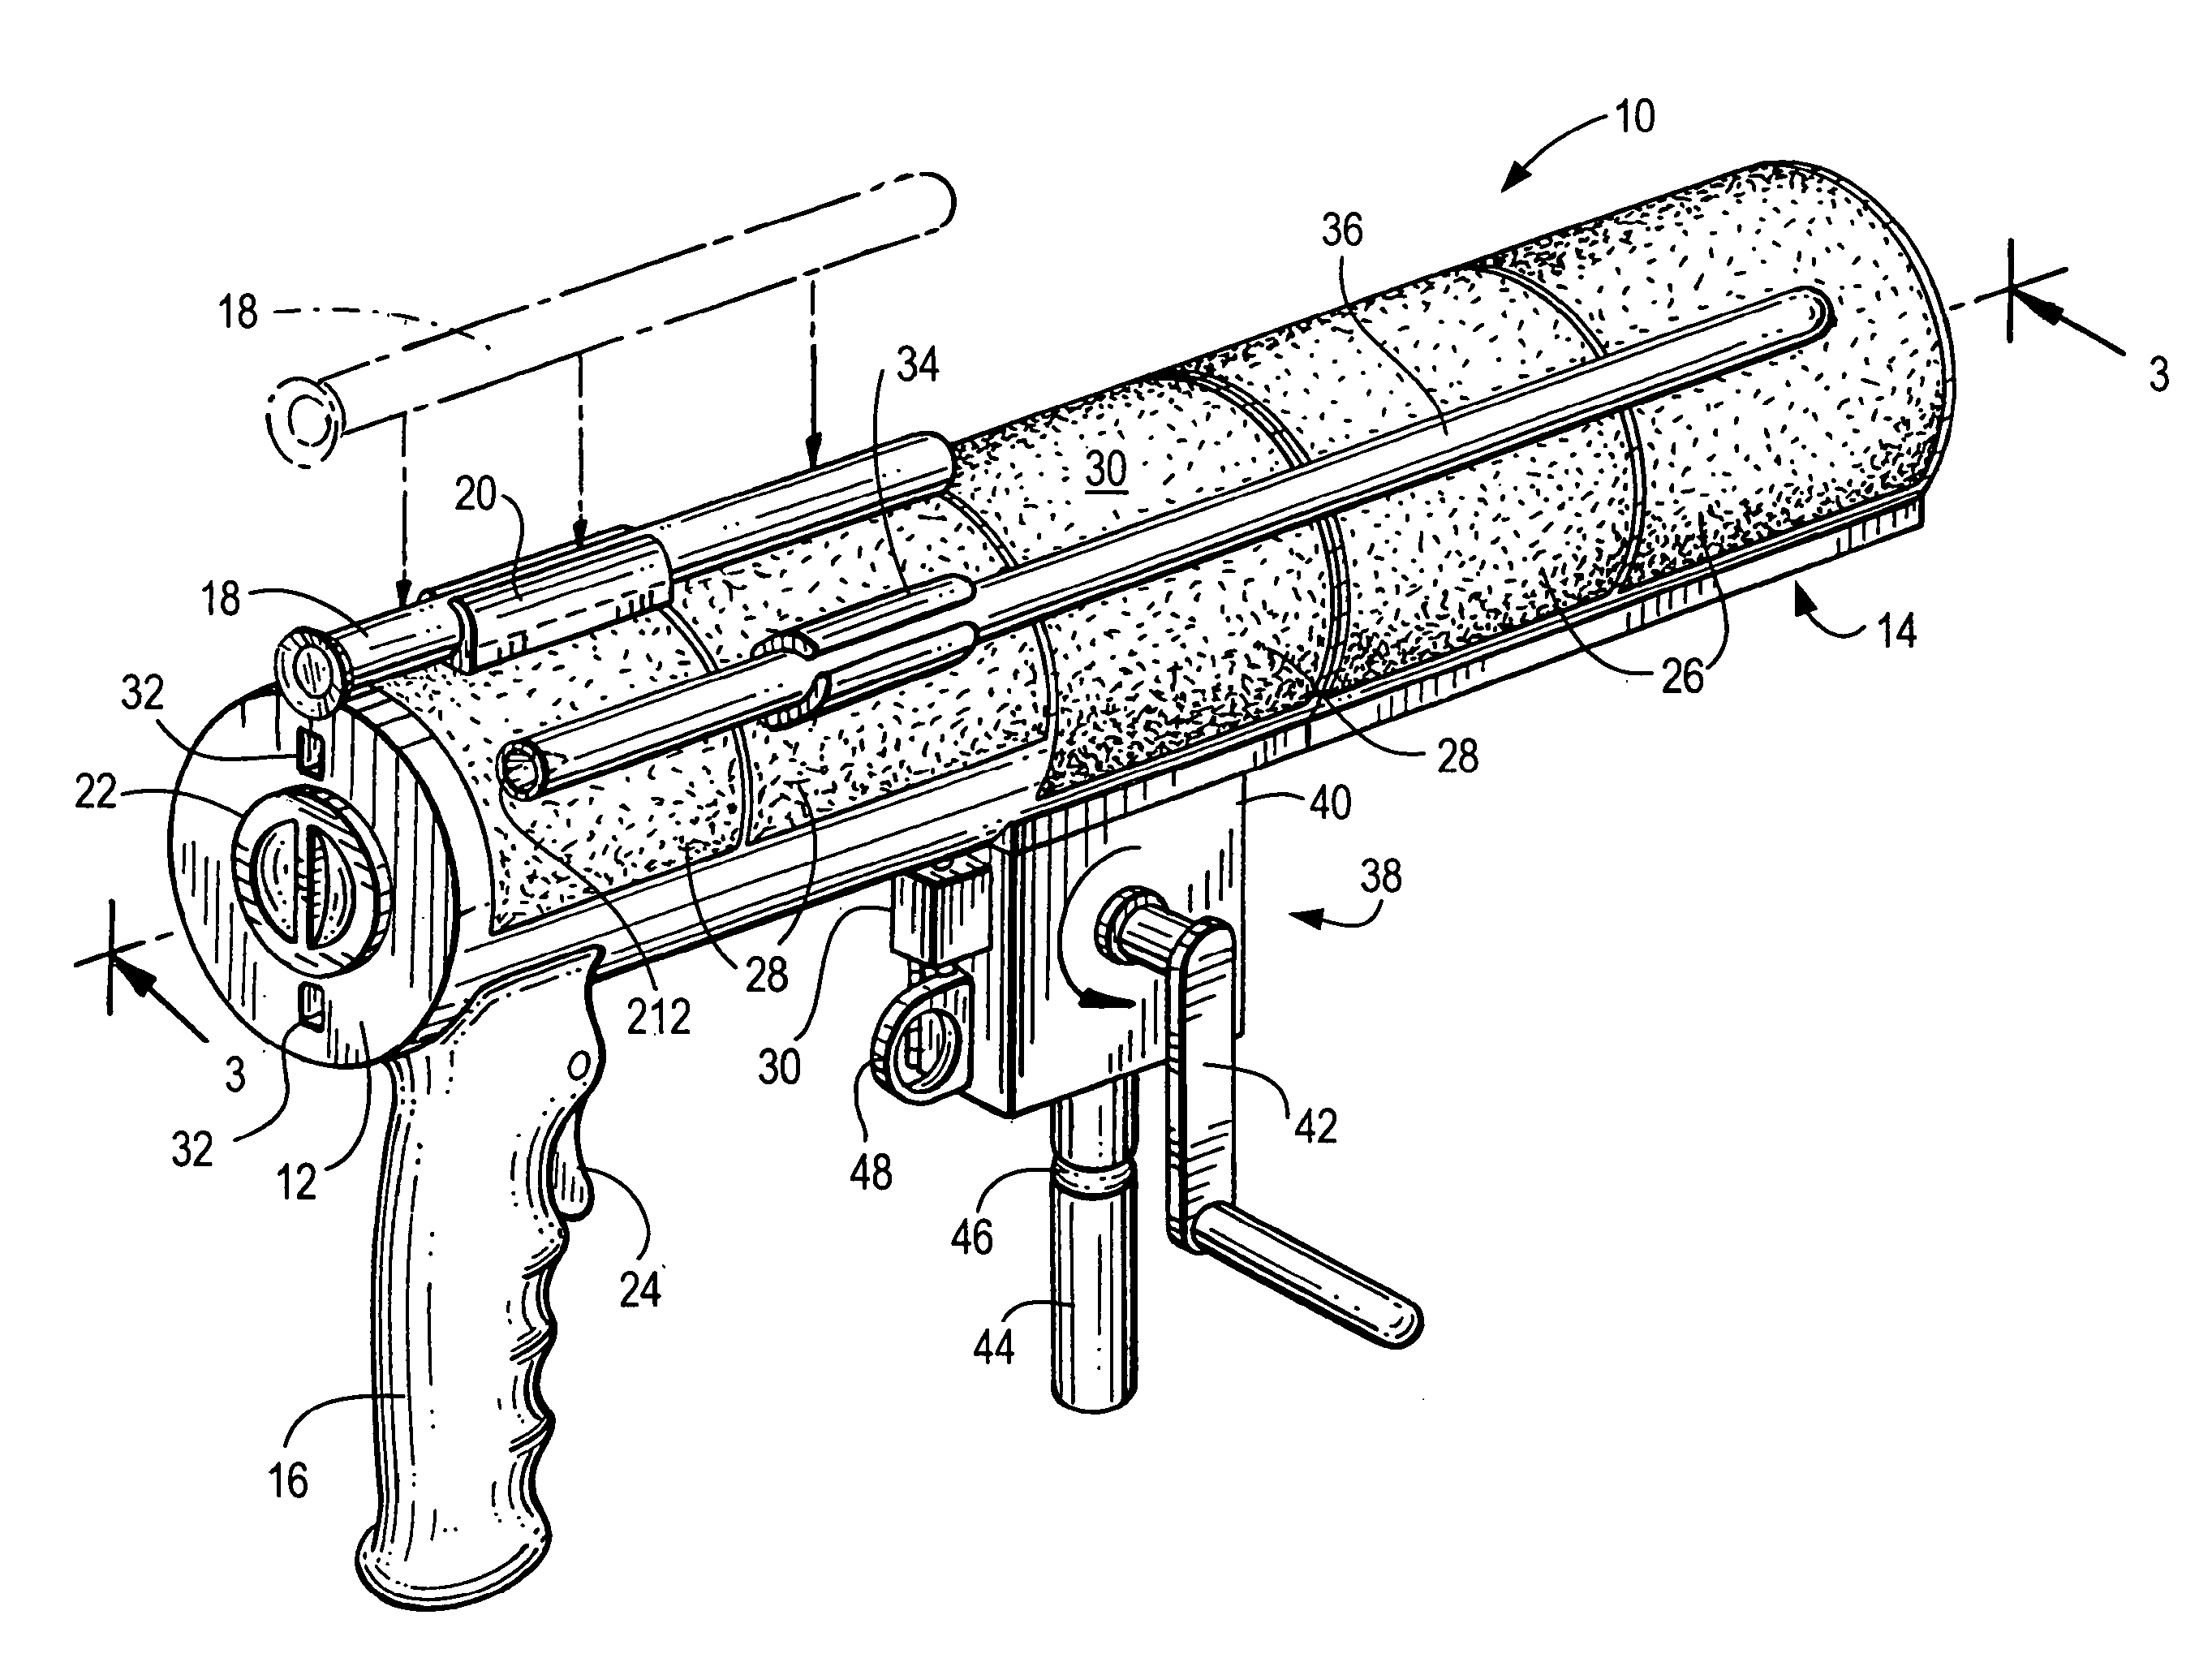 Rescue and retrieval apparatus and system and method of using same